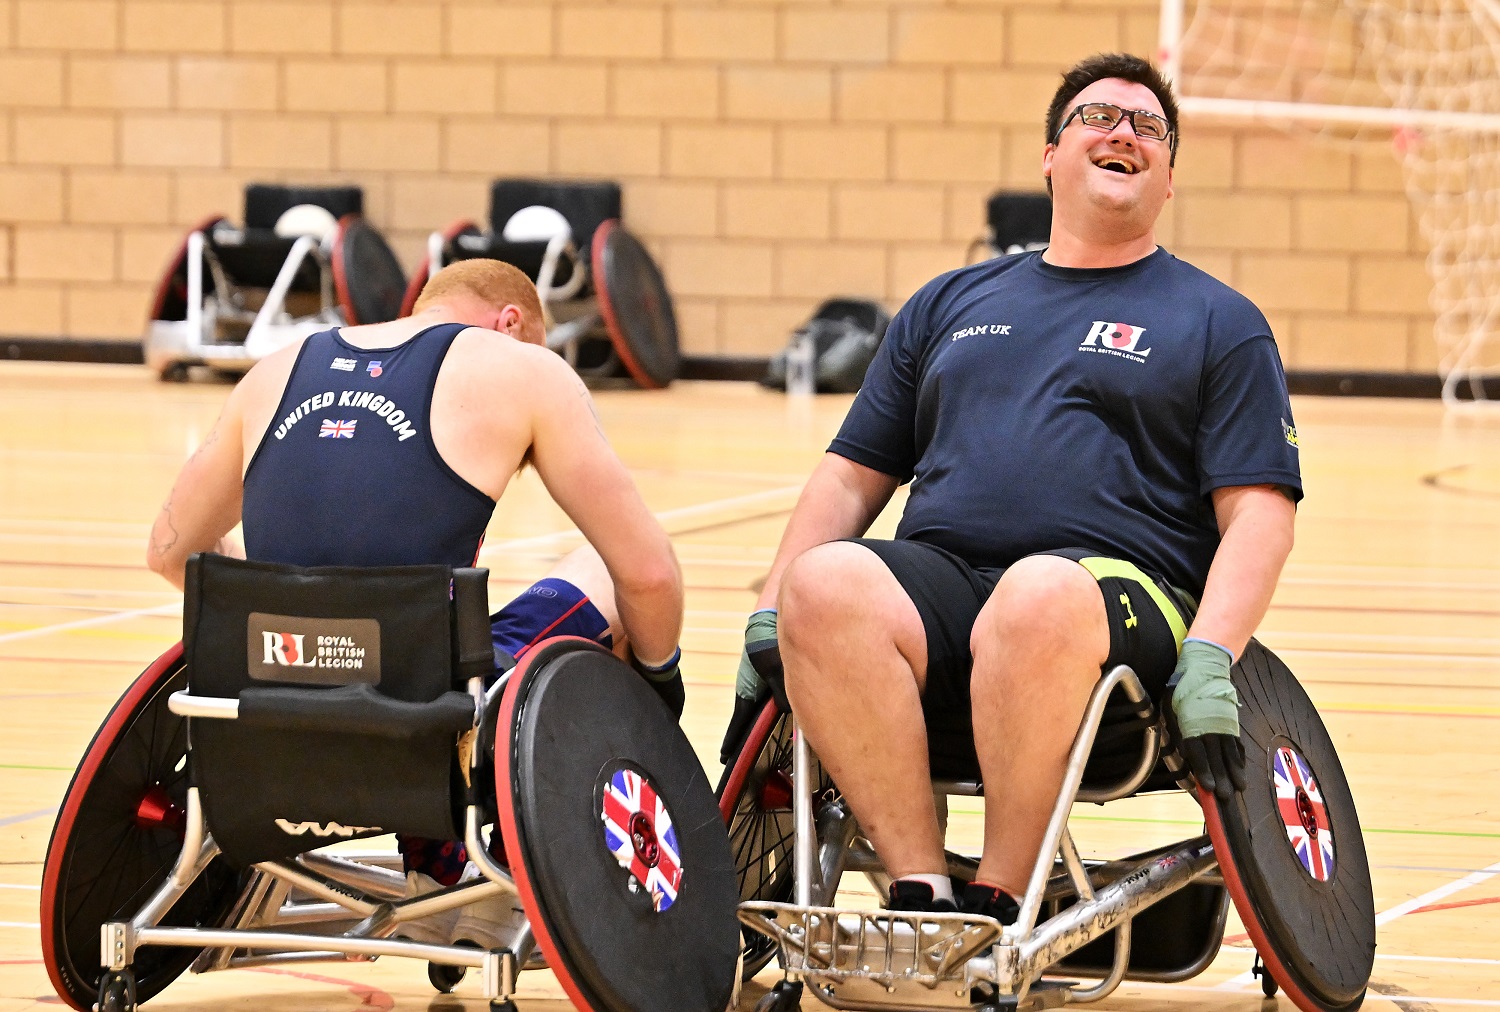 Matthew Trigg playing wheelchair rugby, he is laughing with another player